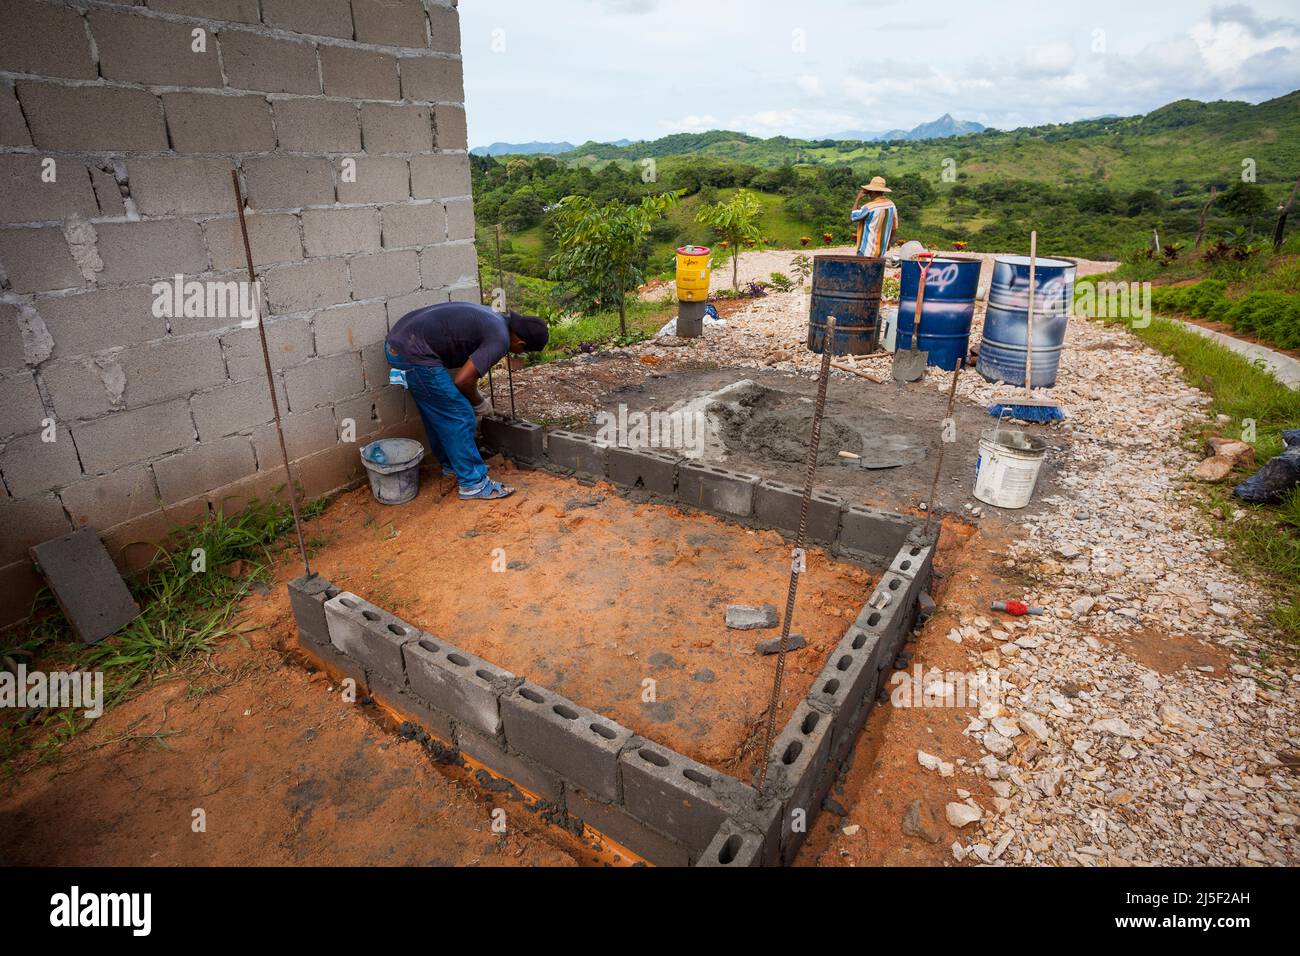 Construction worker is buliding a new house in Las Minas de Tulu, Cocle province, Republic of Panama, Central America. Stock Photo